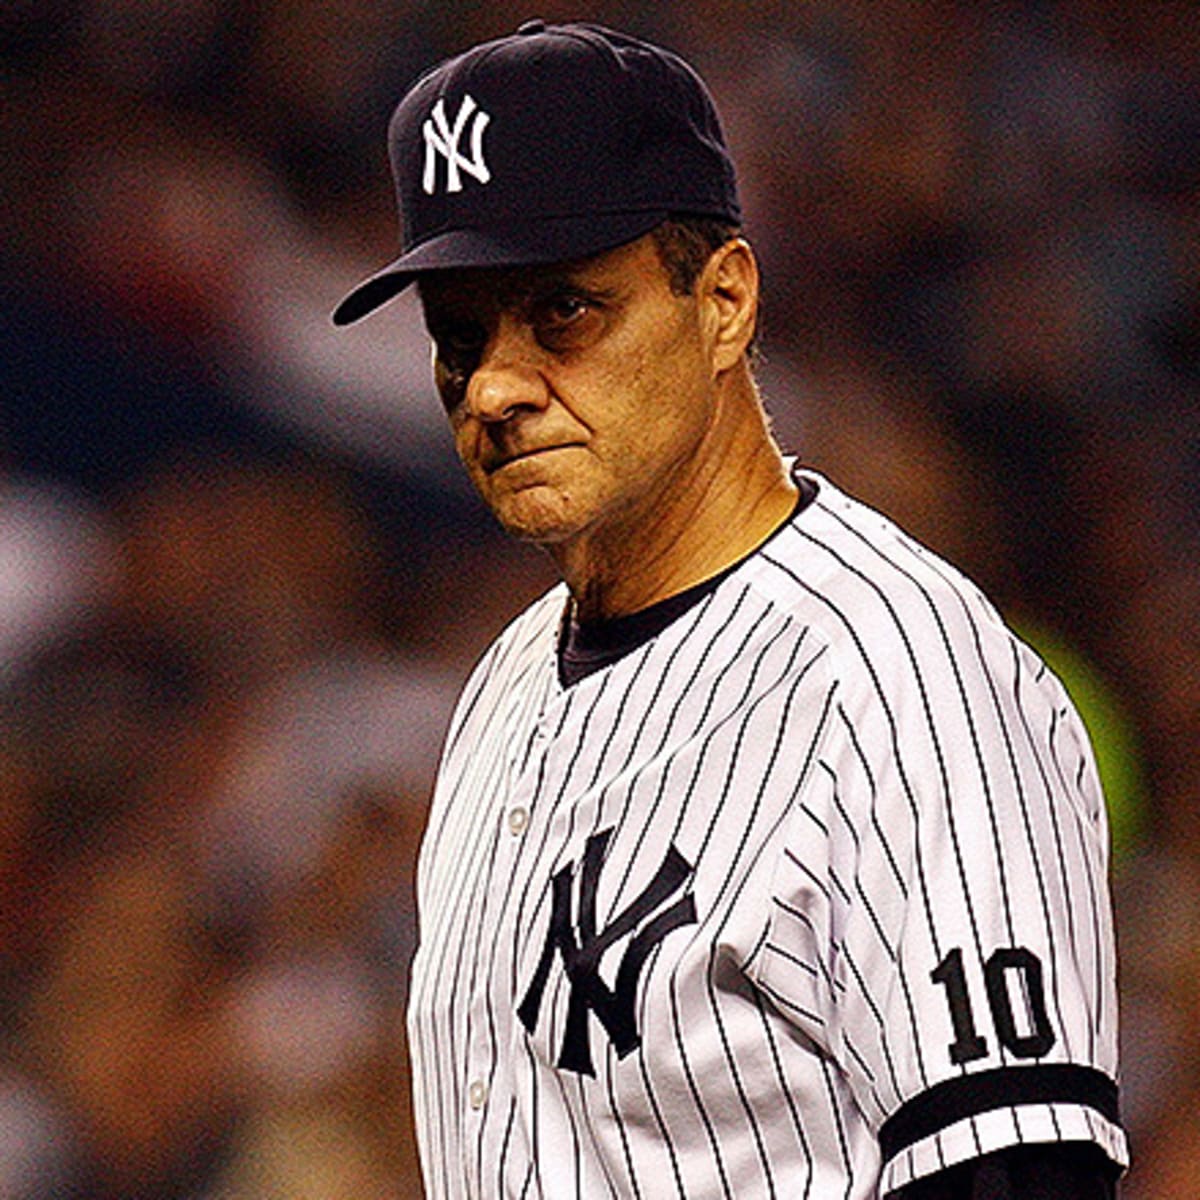 Yankees legend, former Manager of the Year, named Blue Jays' bench